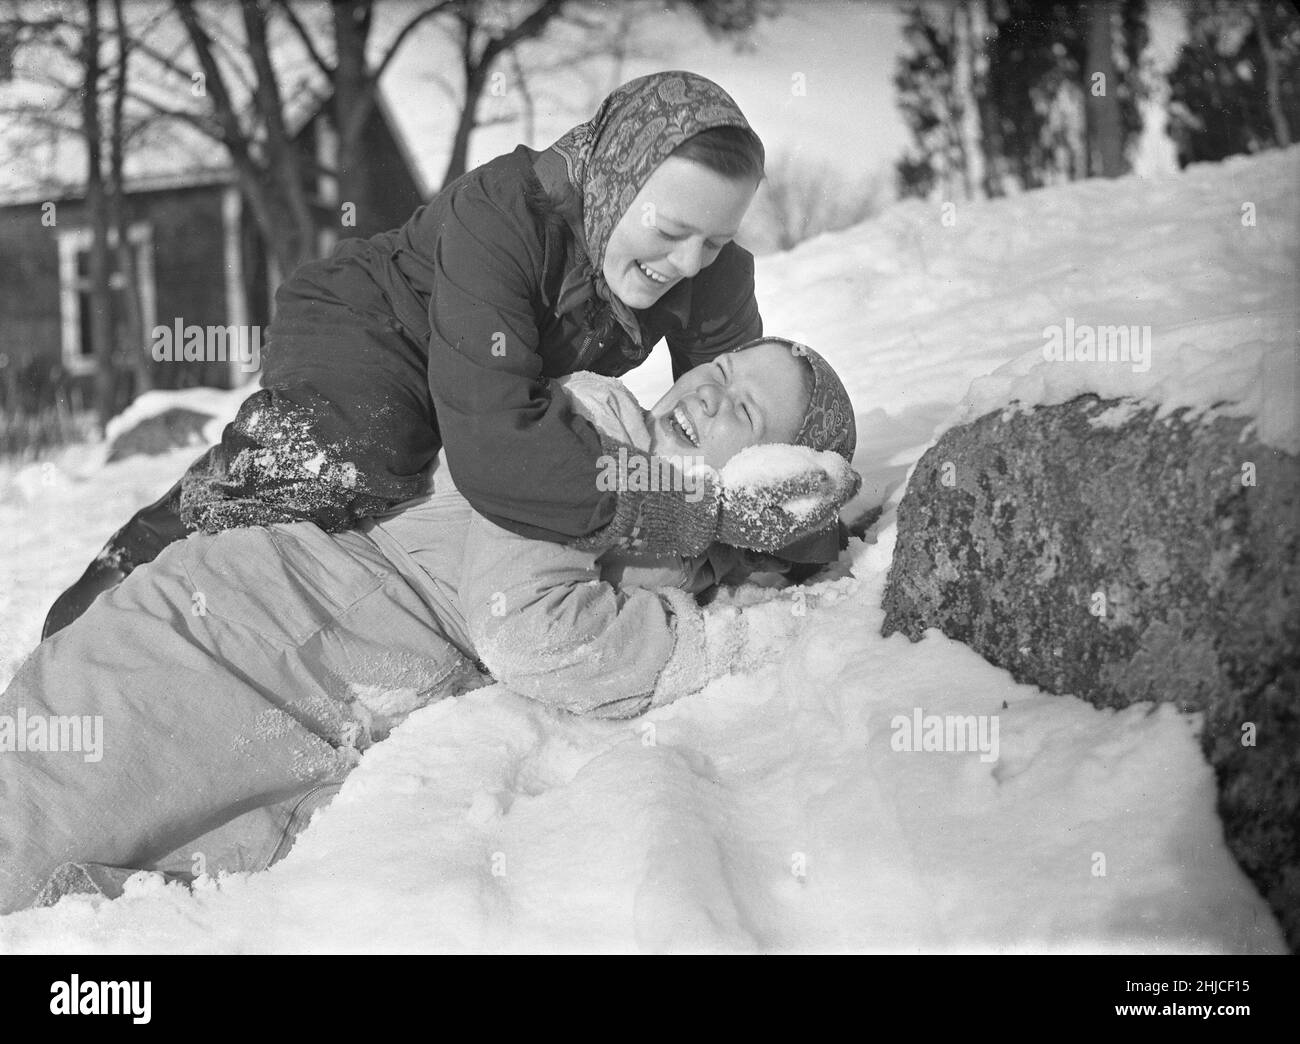 Winter in the 1940s. The two girls are playing in the snow laughing. One on top of the other putting snow in her face. They are workers on a farm in Sweden during world war II and took the male workers roles when they instead were in the swedish army and often placed at the swedish border far away. Rotebro Sweden February 1940. Kristoffersson ref 78-3 Stock Photo